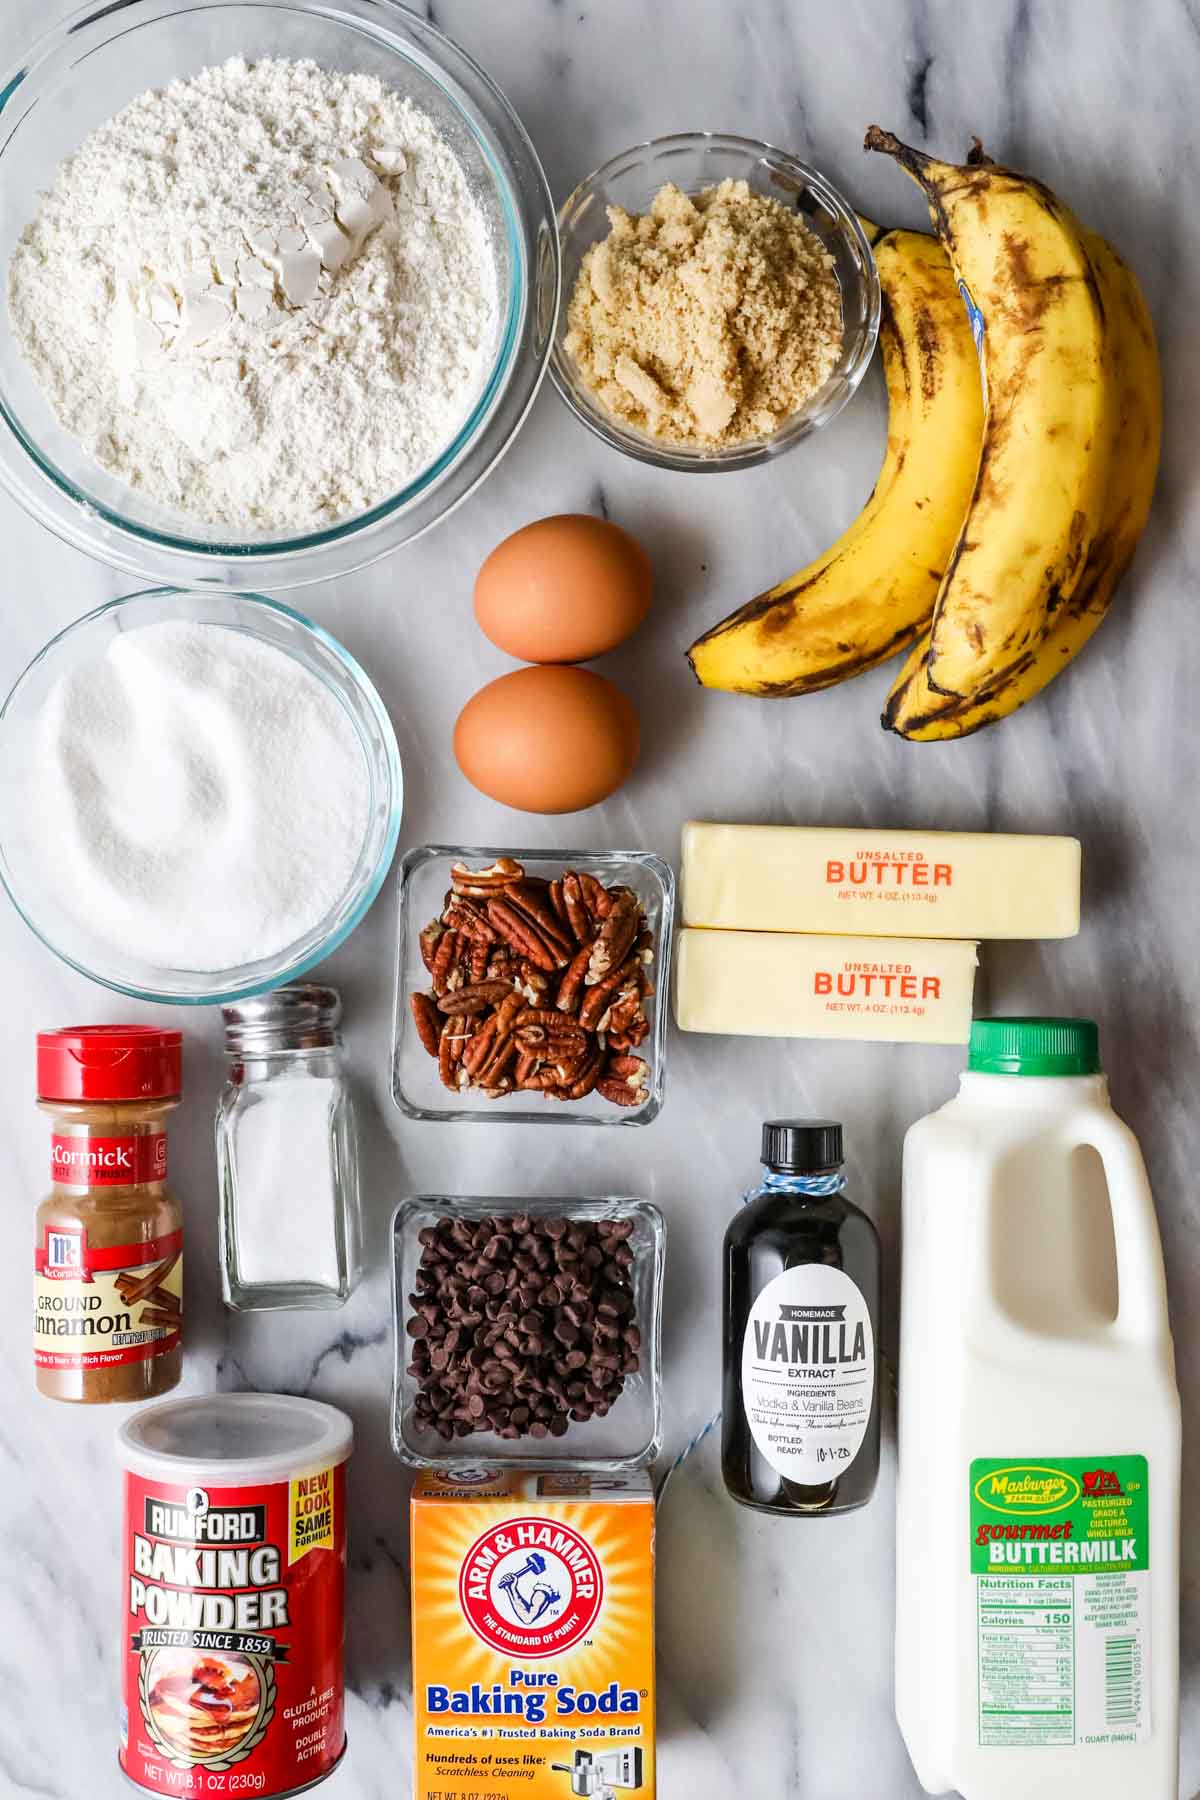 Overhead view of ingredients including bananas, brown sugar, buttermilk, and more.